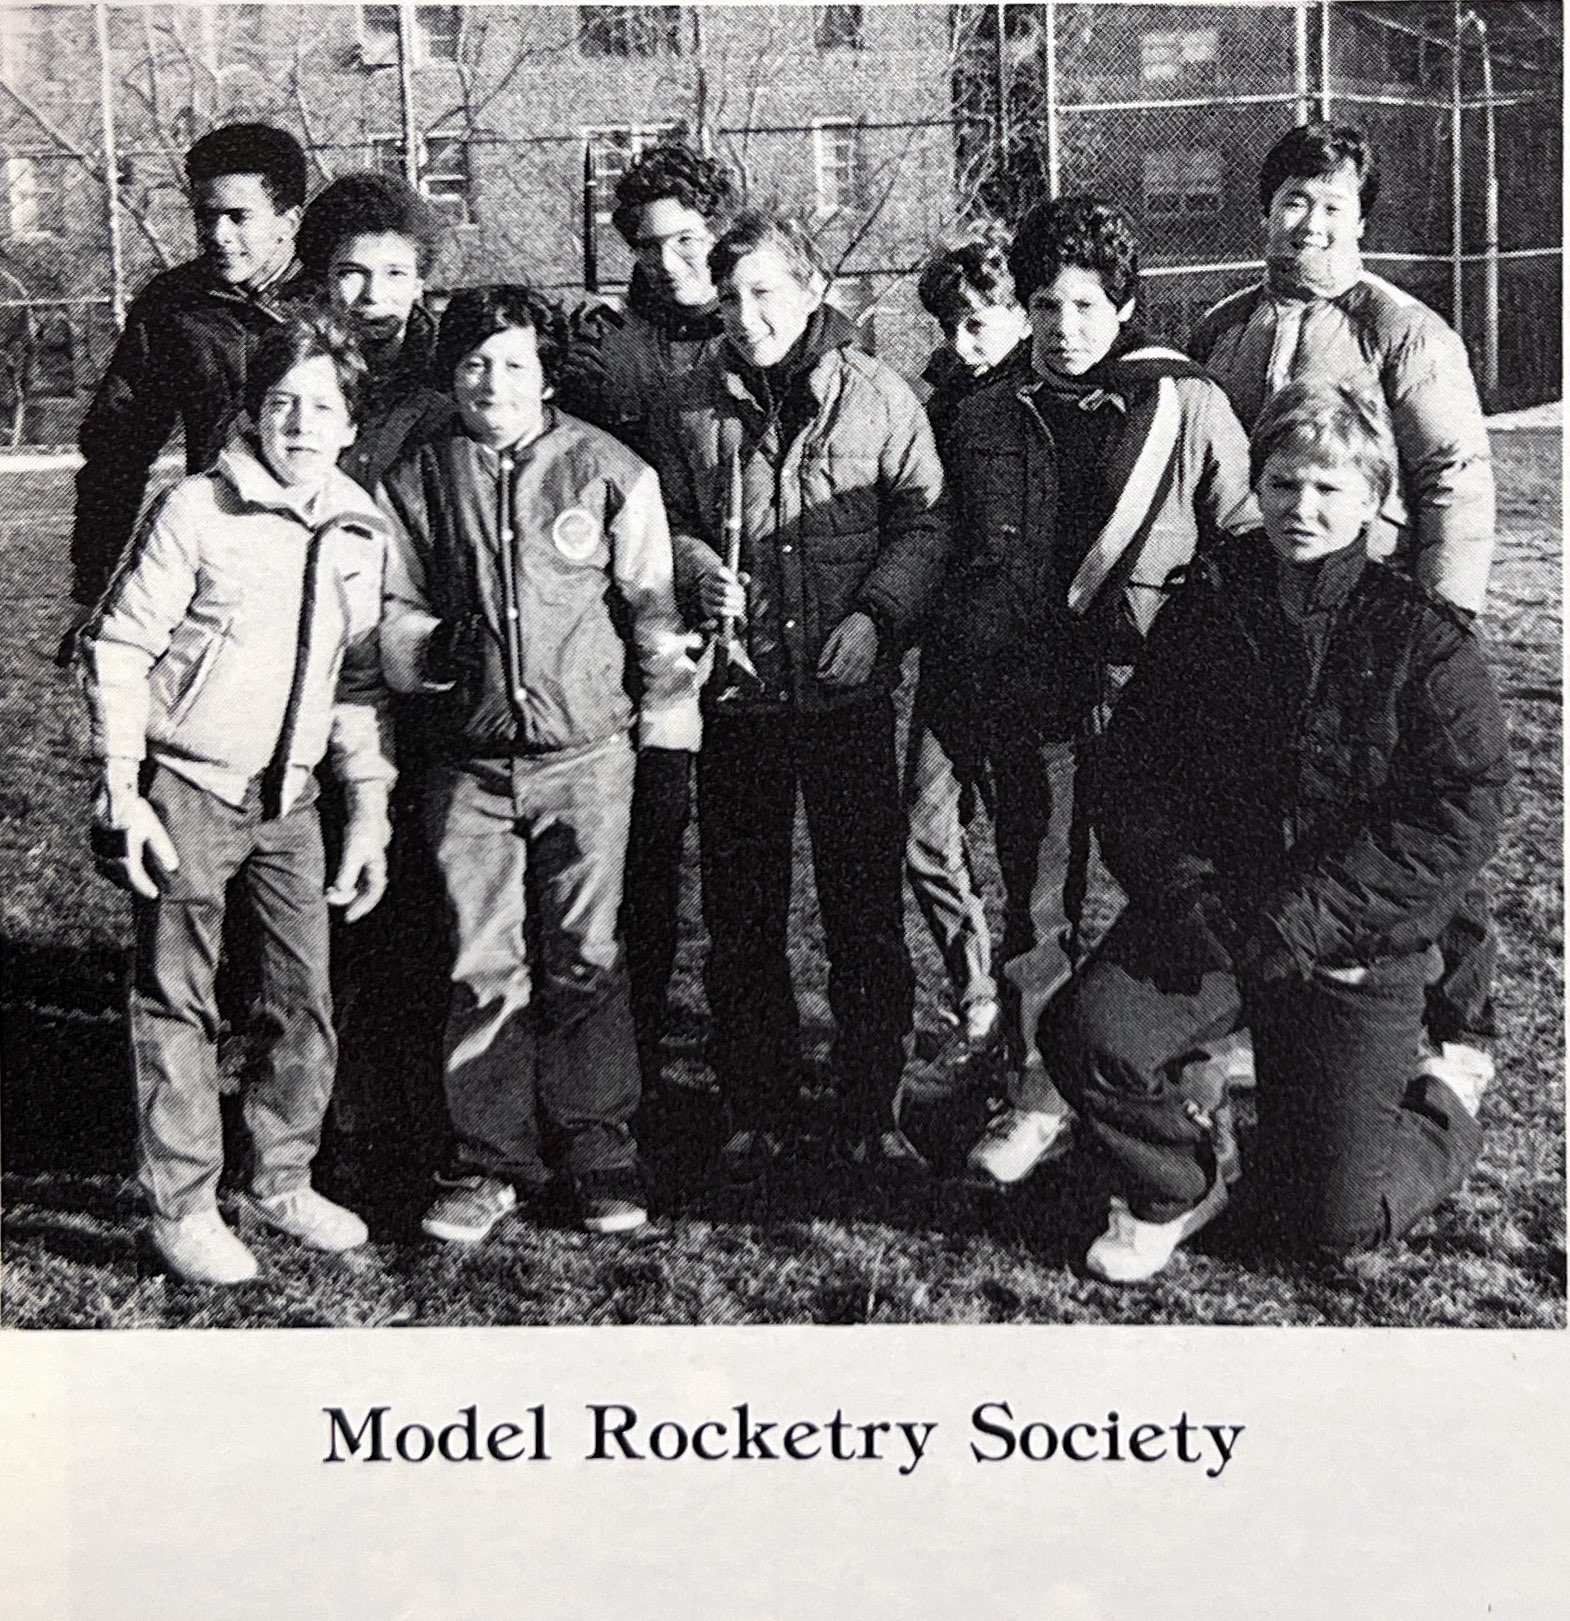 A scanned black-and-white photo from a yearbook shows a group of students posting together, with one student holding a small model rocket. Under the photo is the caption "Model Rocketry Society"